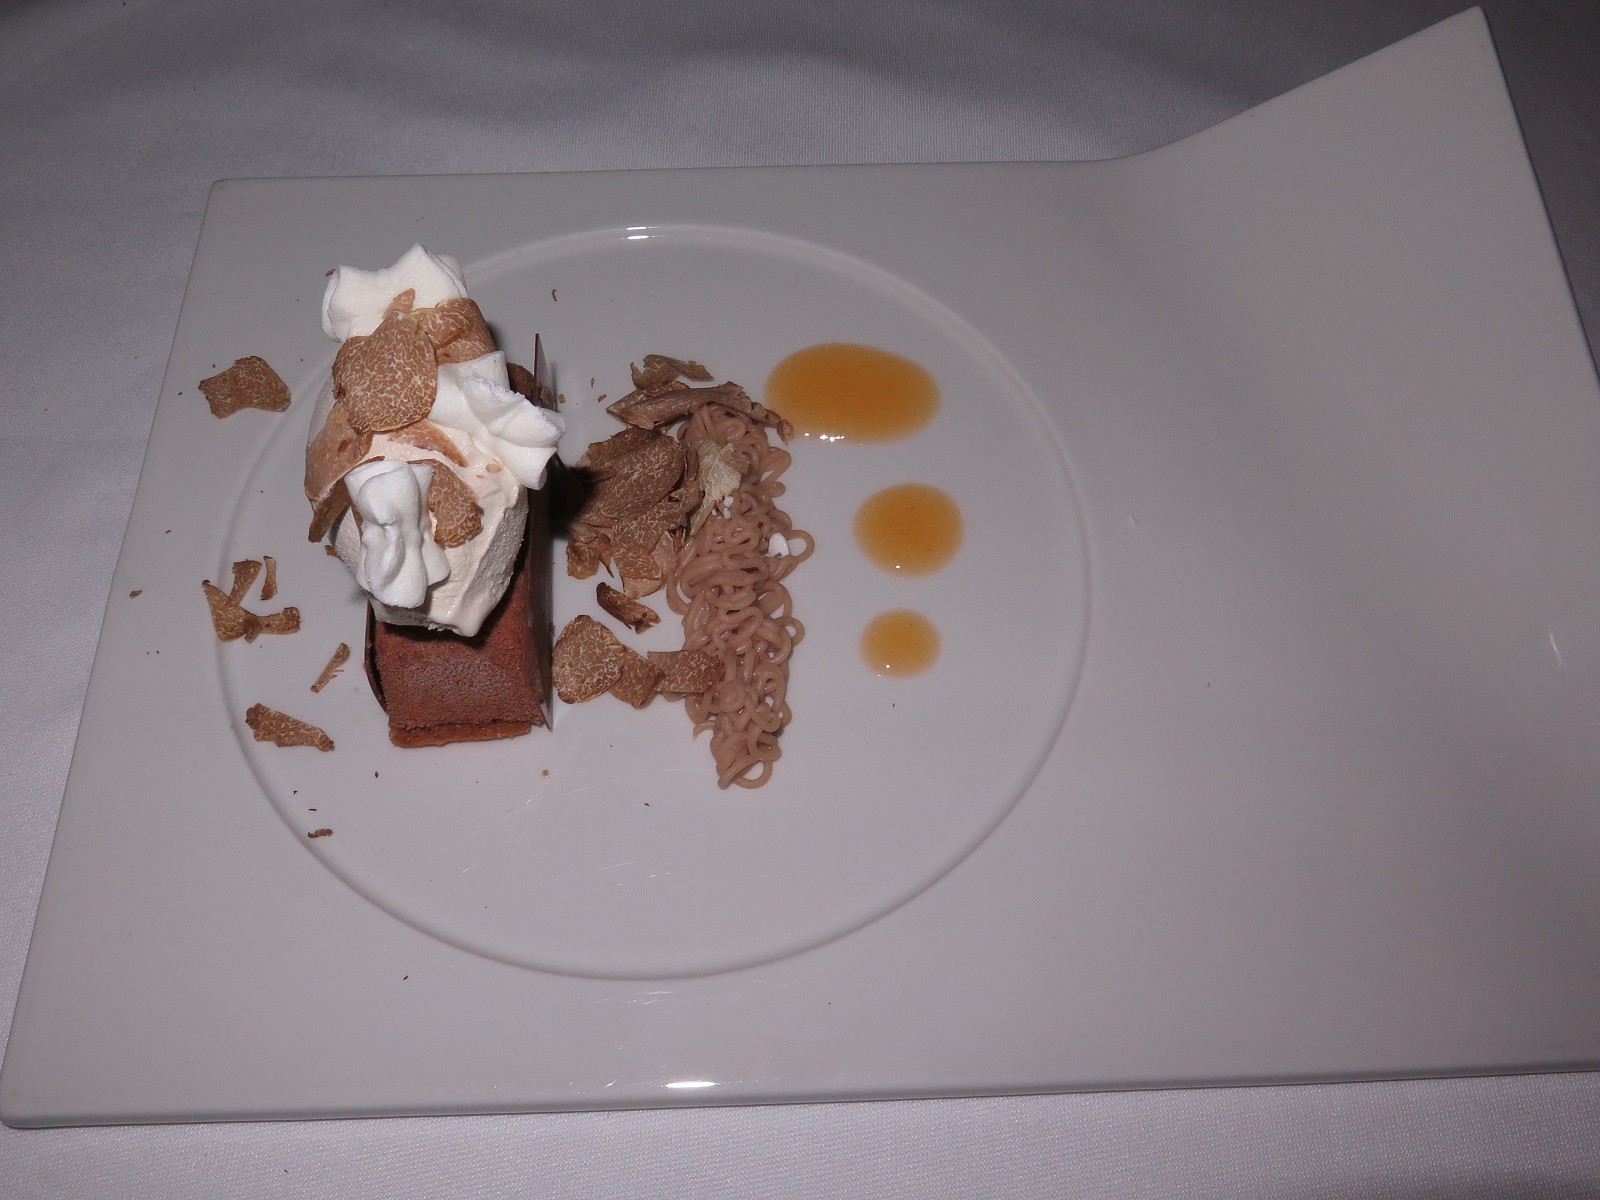 “Interpretation of a coffee Mont Blanc, with persimmons and white truffle”